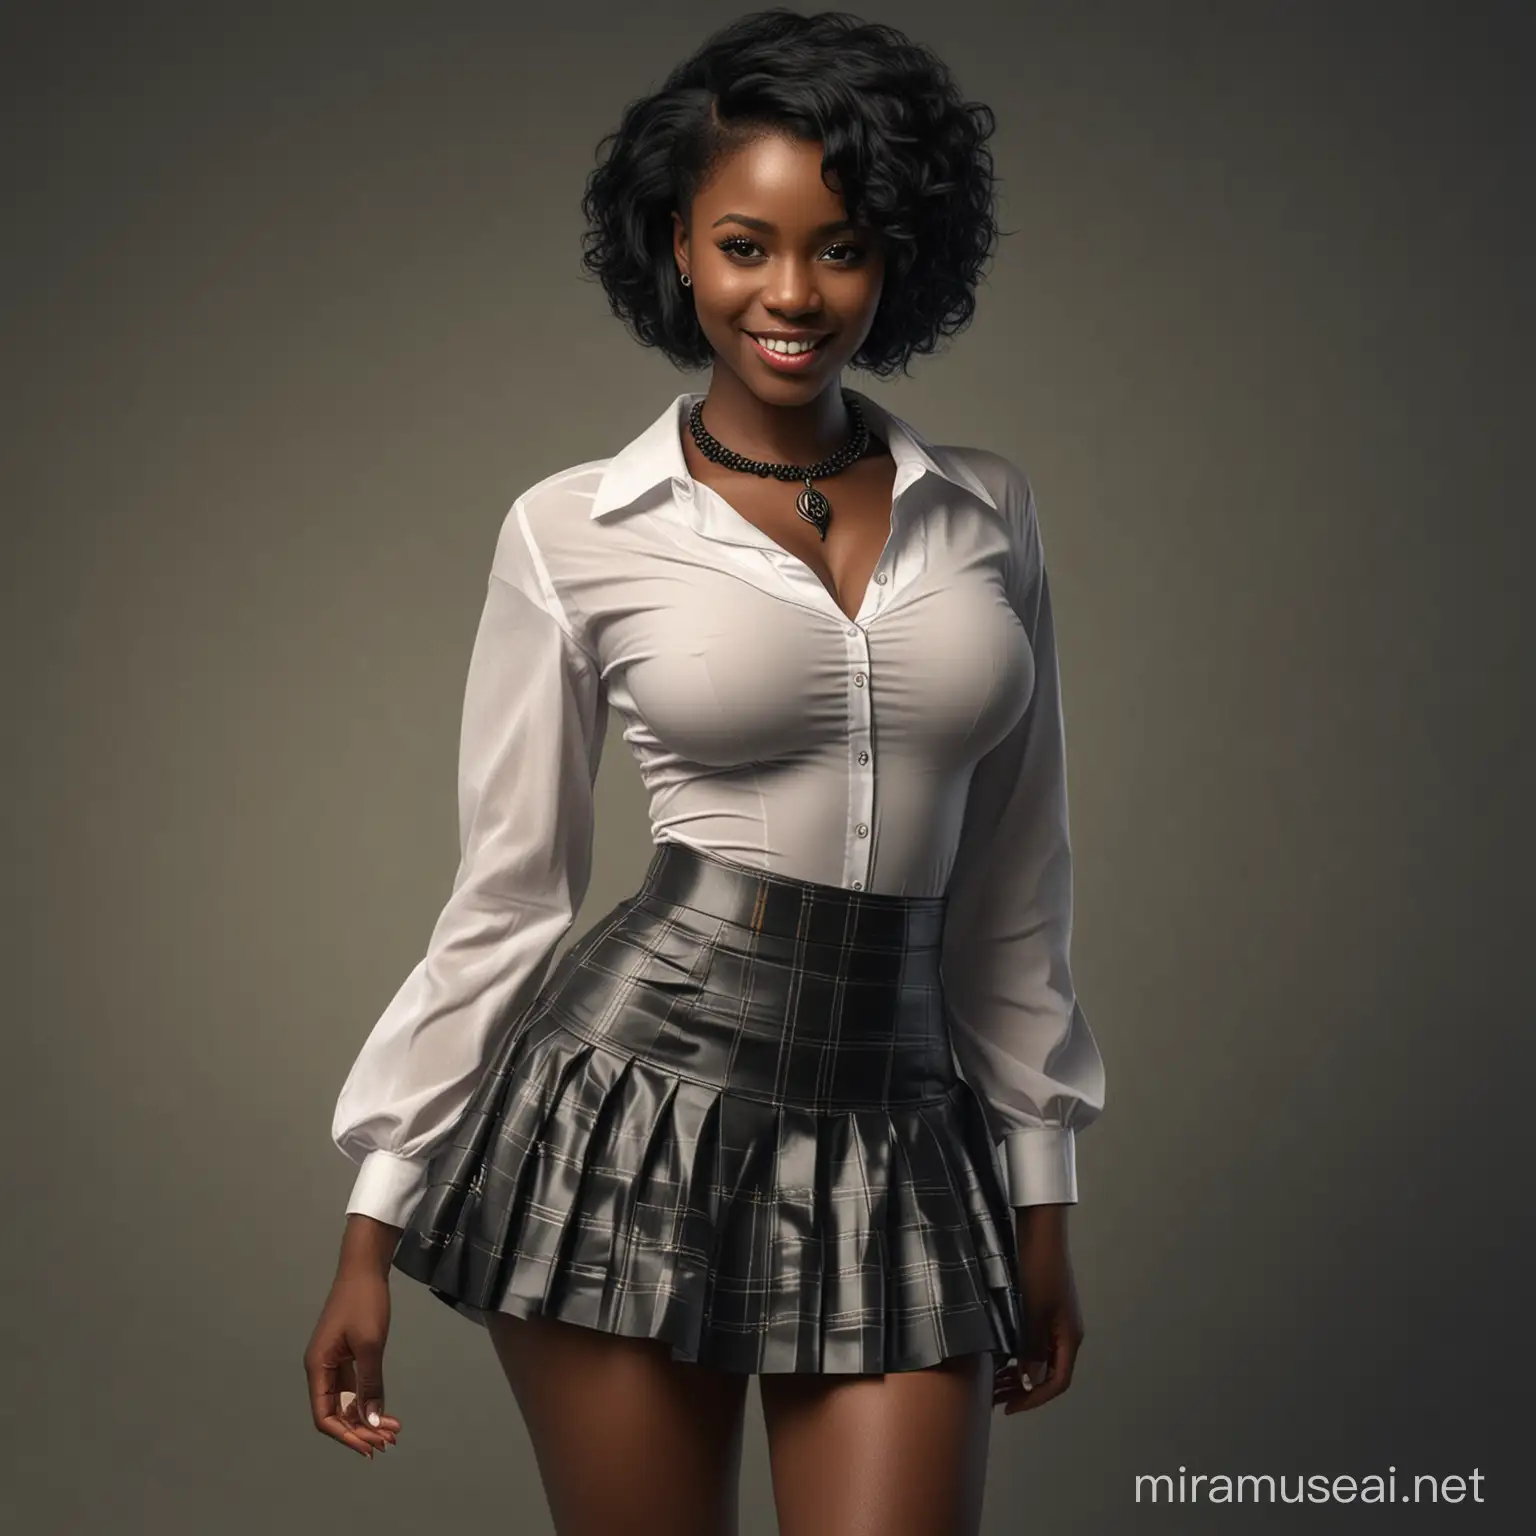 Seductive African Woman in Cinematic Low Light Revealing Collar and Skirt